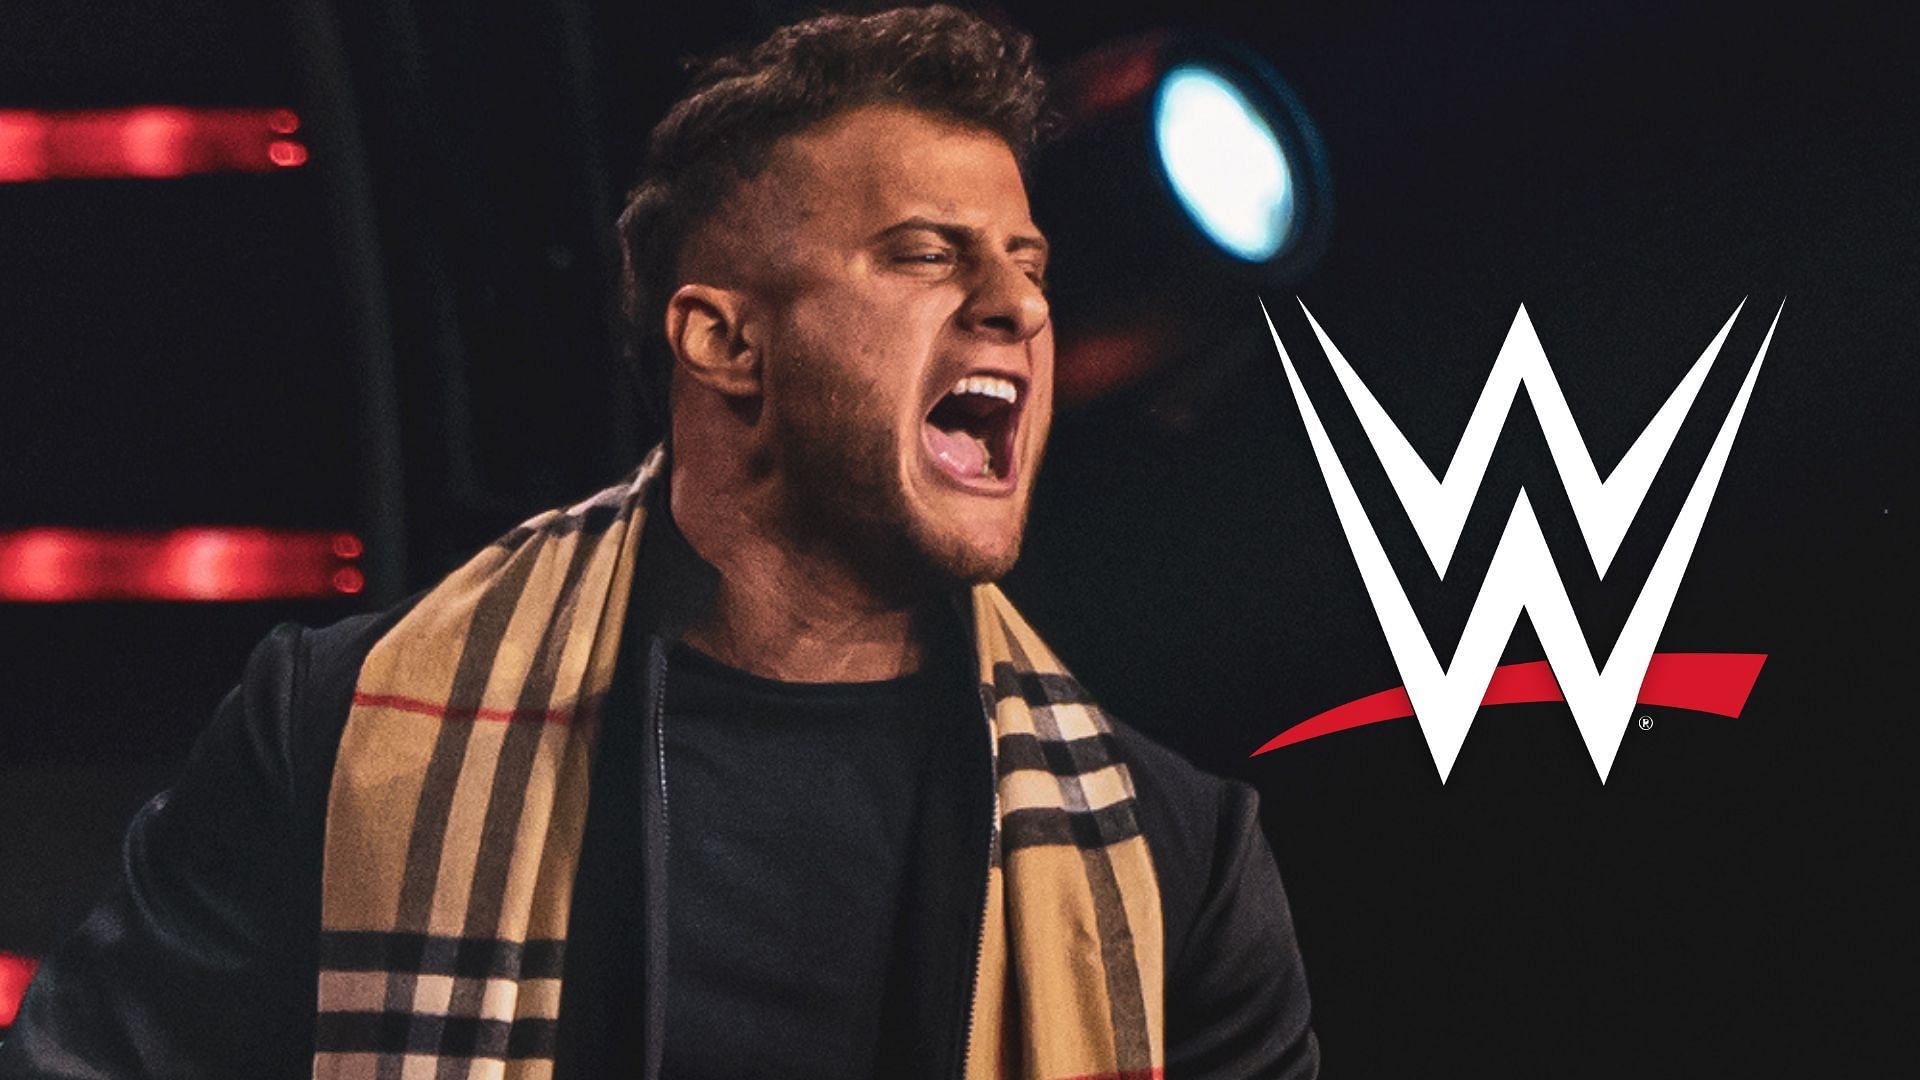 MJF at AEW All Out 2022 (credit: Jay Lee Photography)